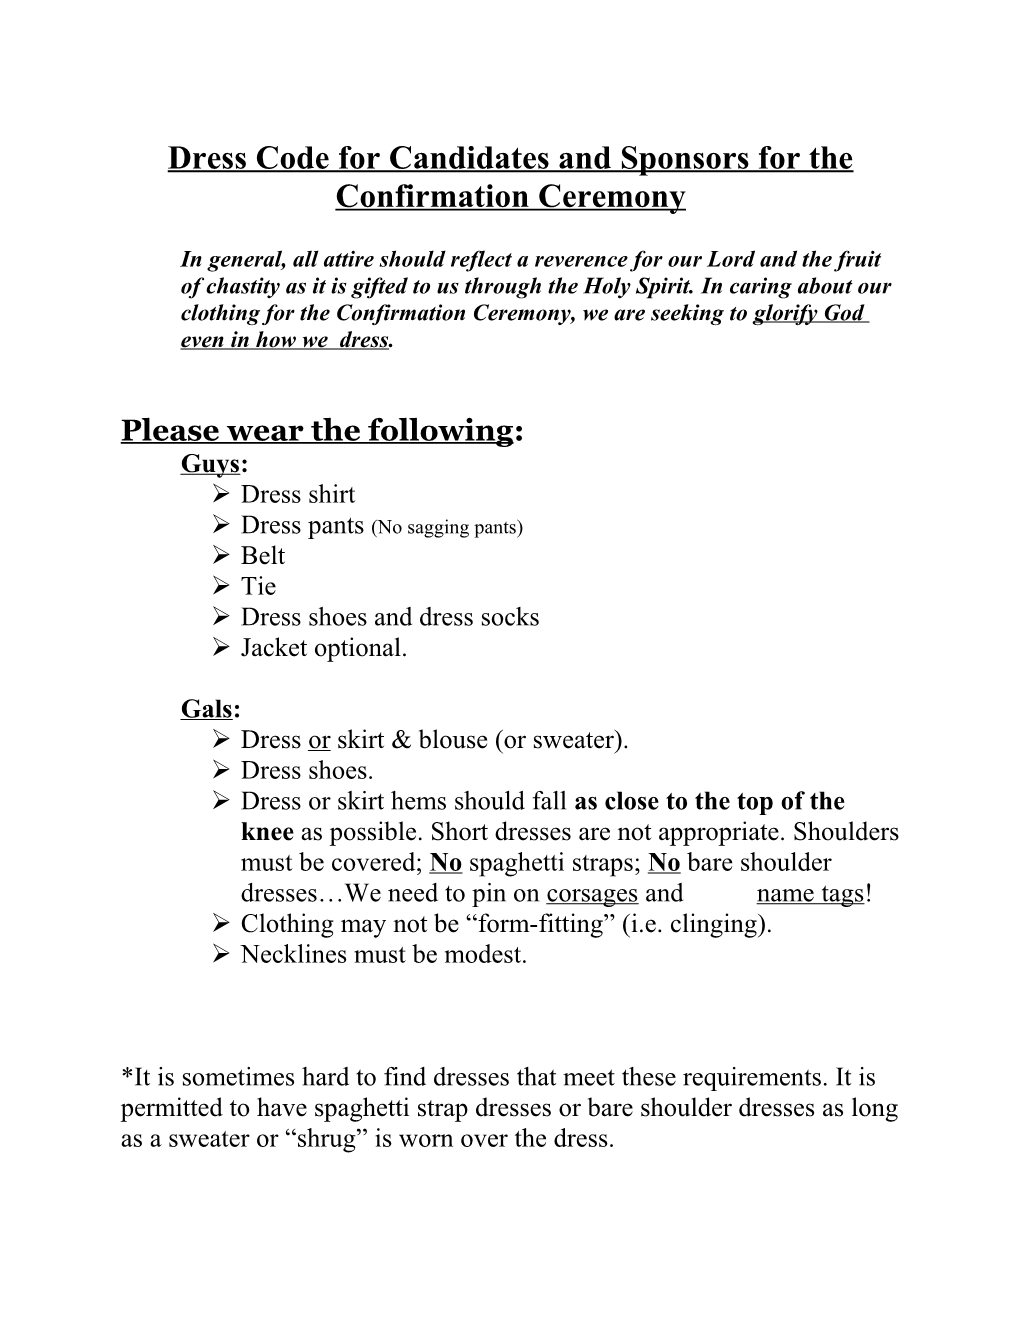 Dress Code for Candidates and Sponsors for the Confirmation Ceremony